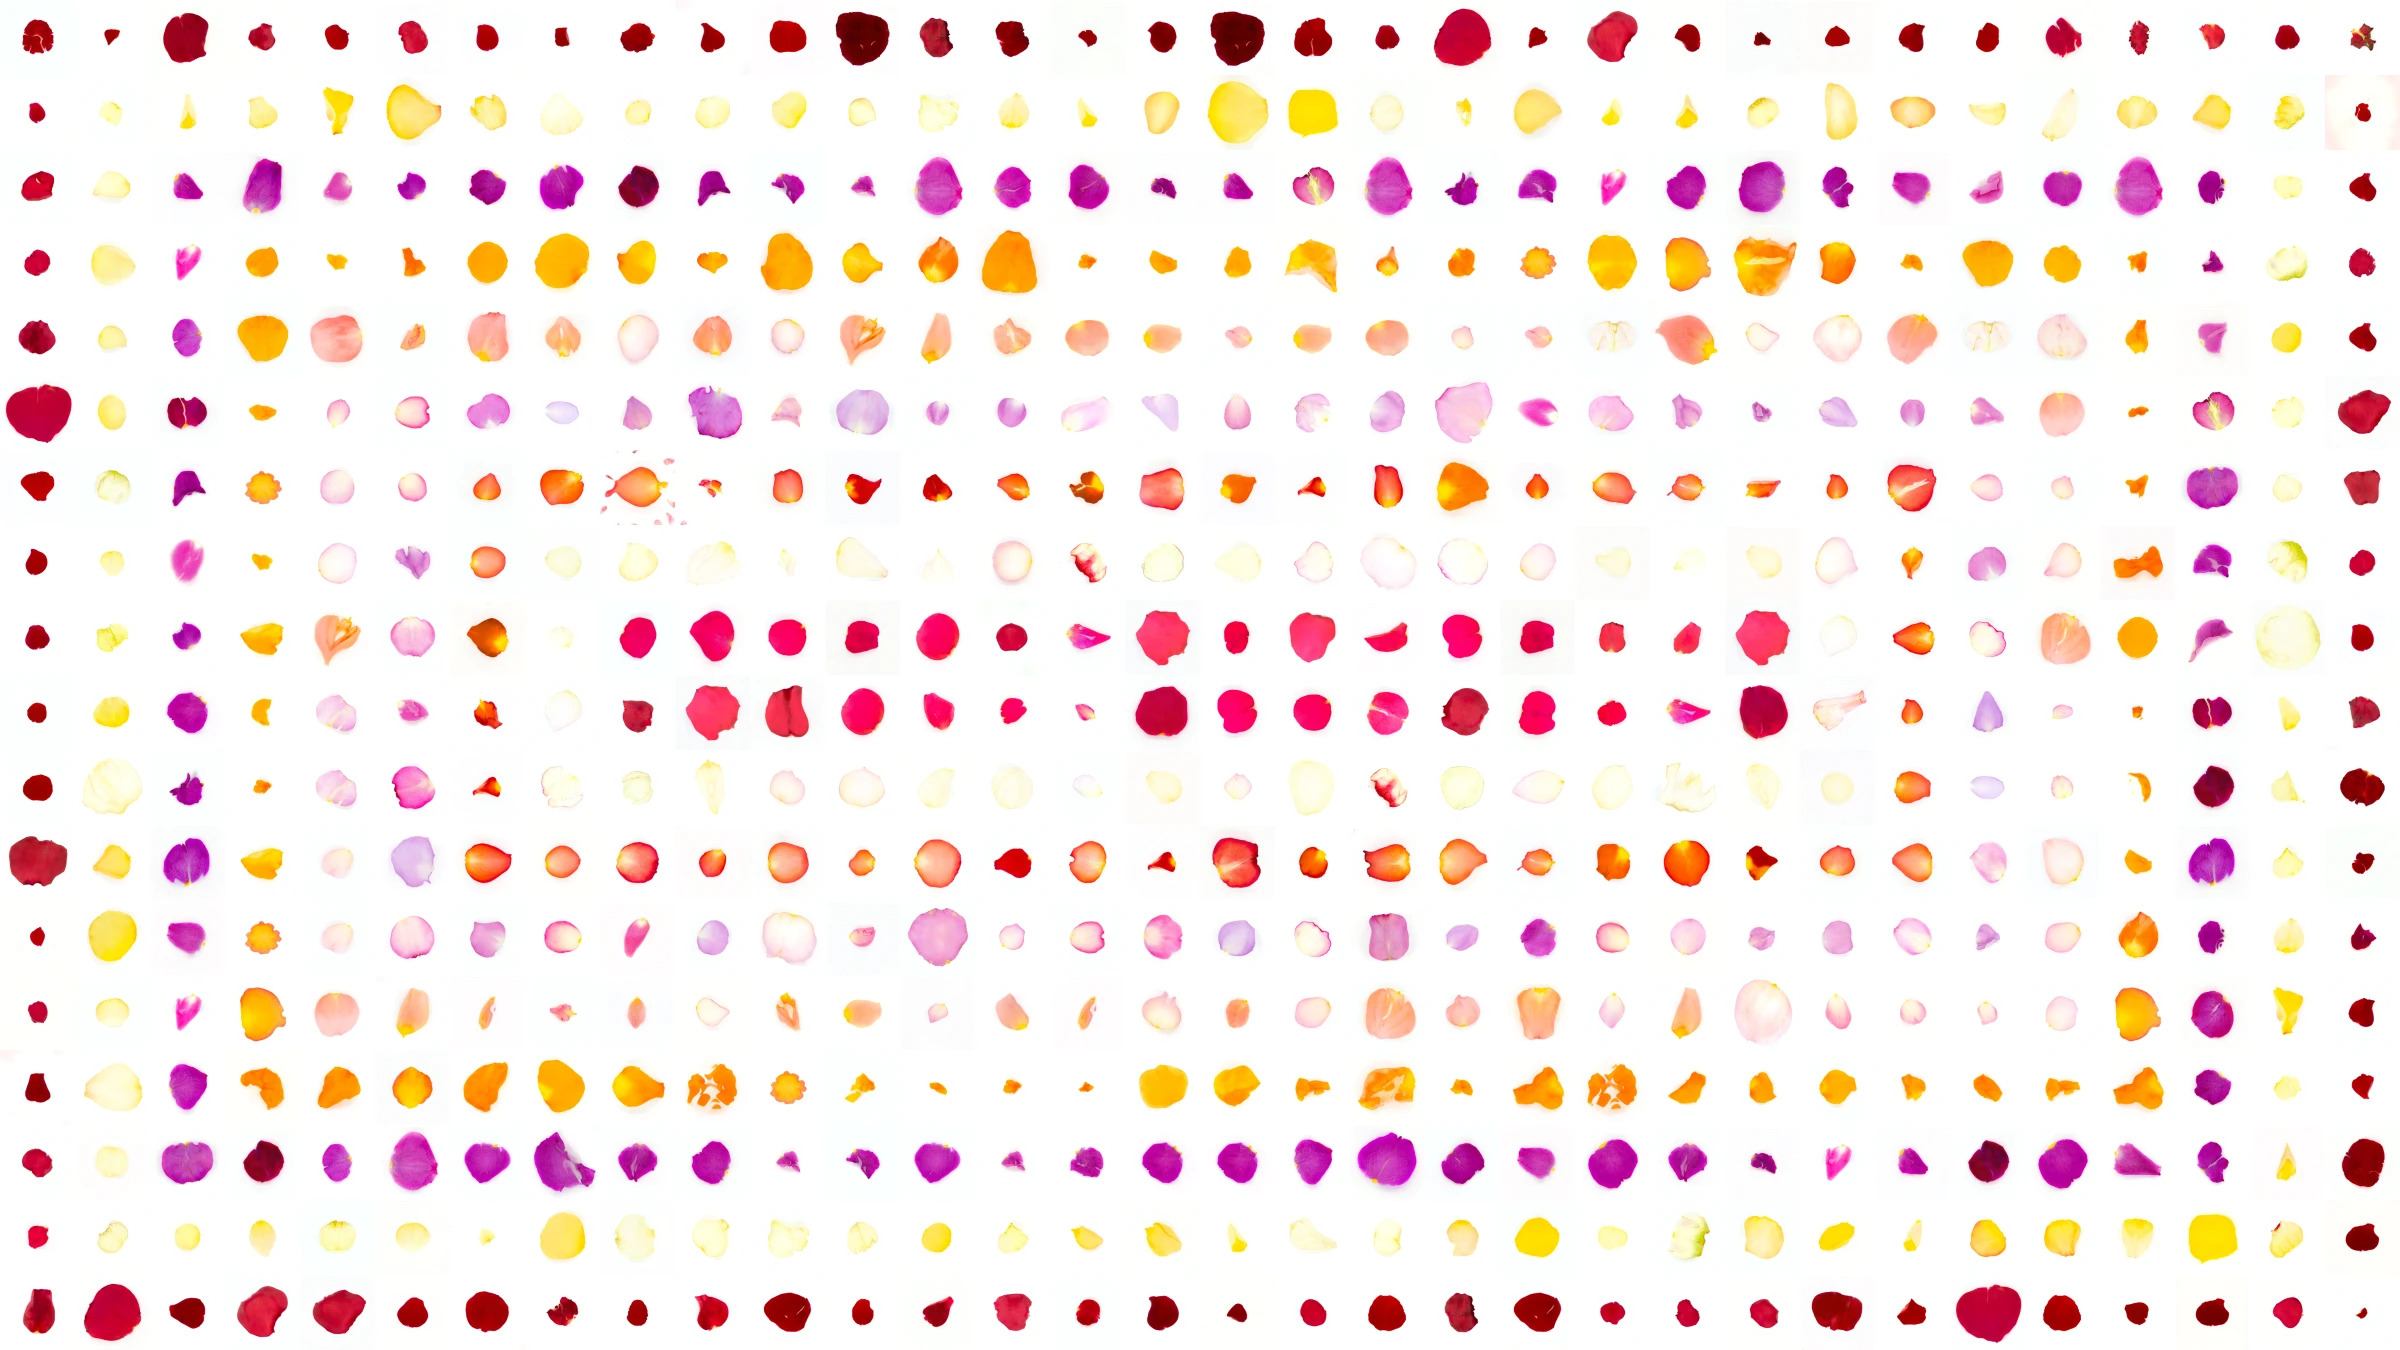 A grid of rose petals in varying shapes, sizes, and colors against a stark white background